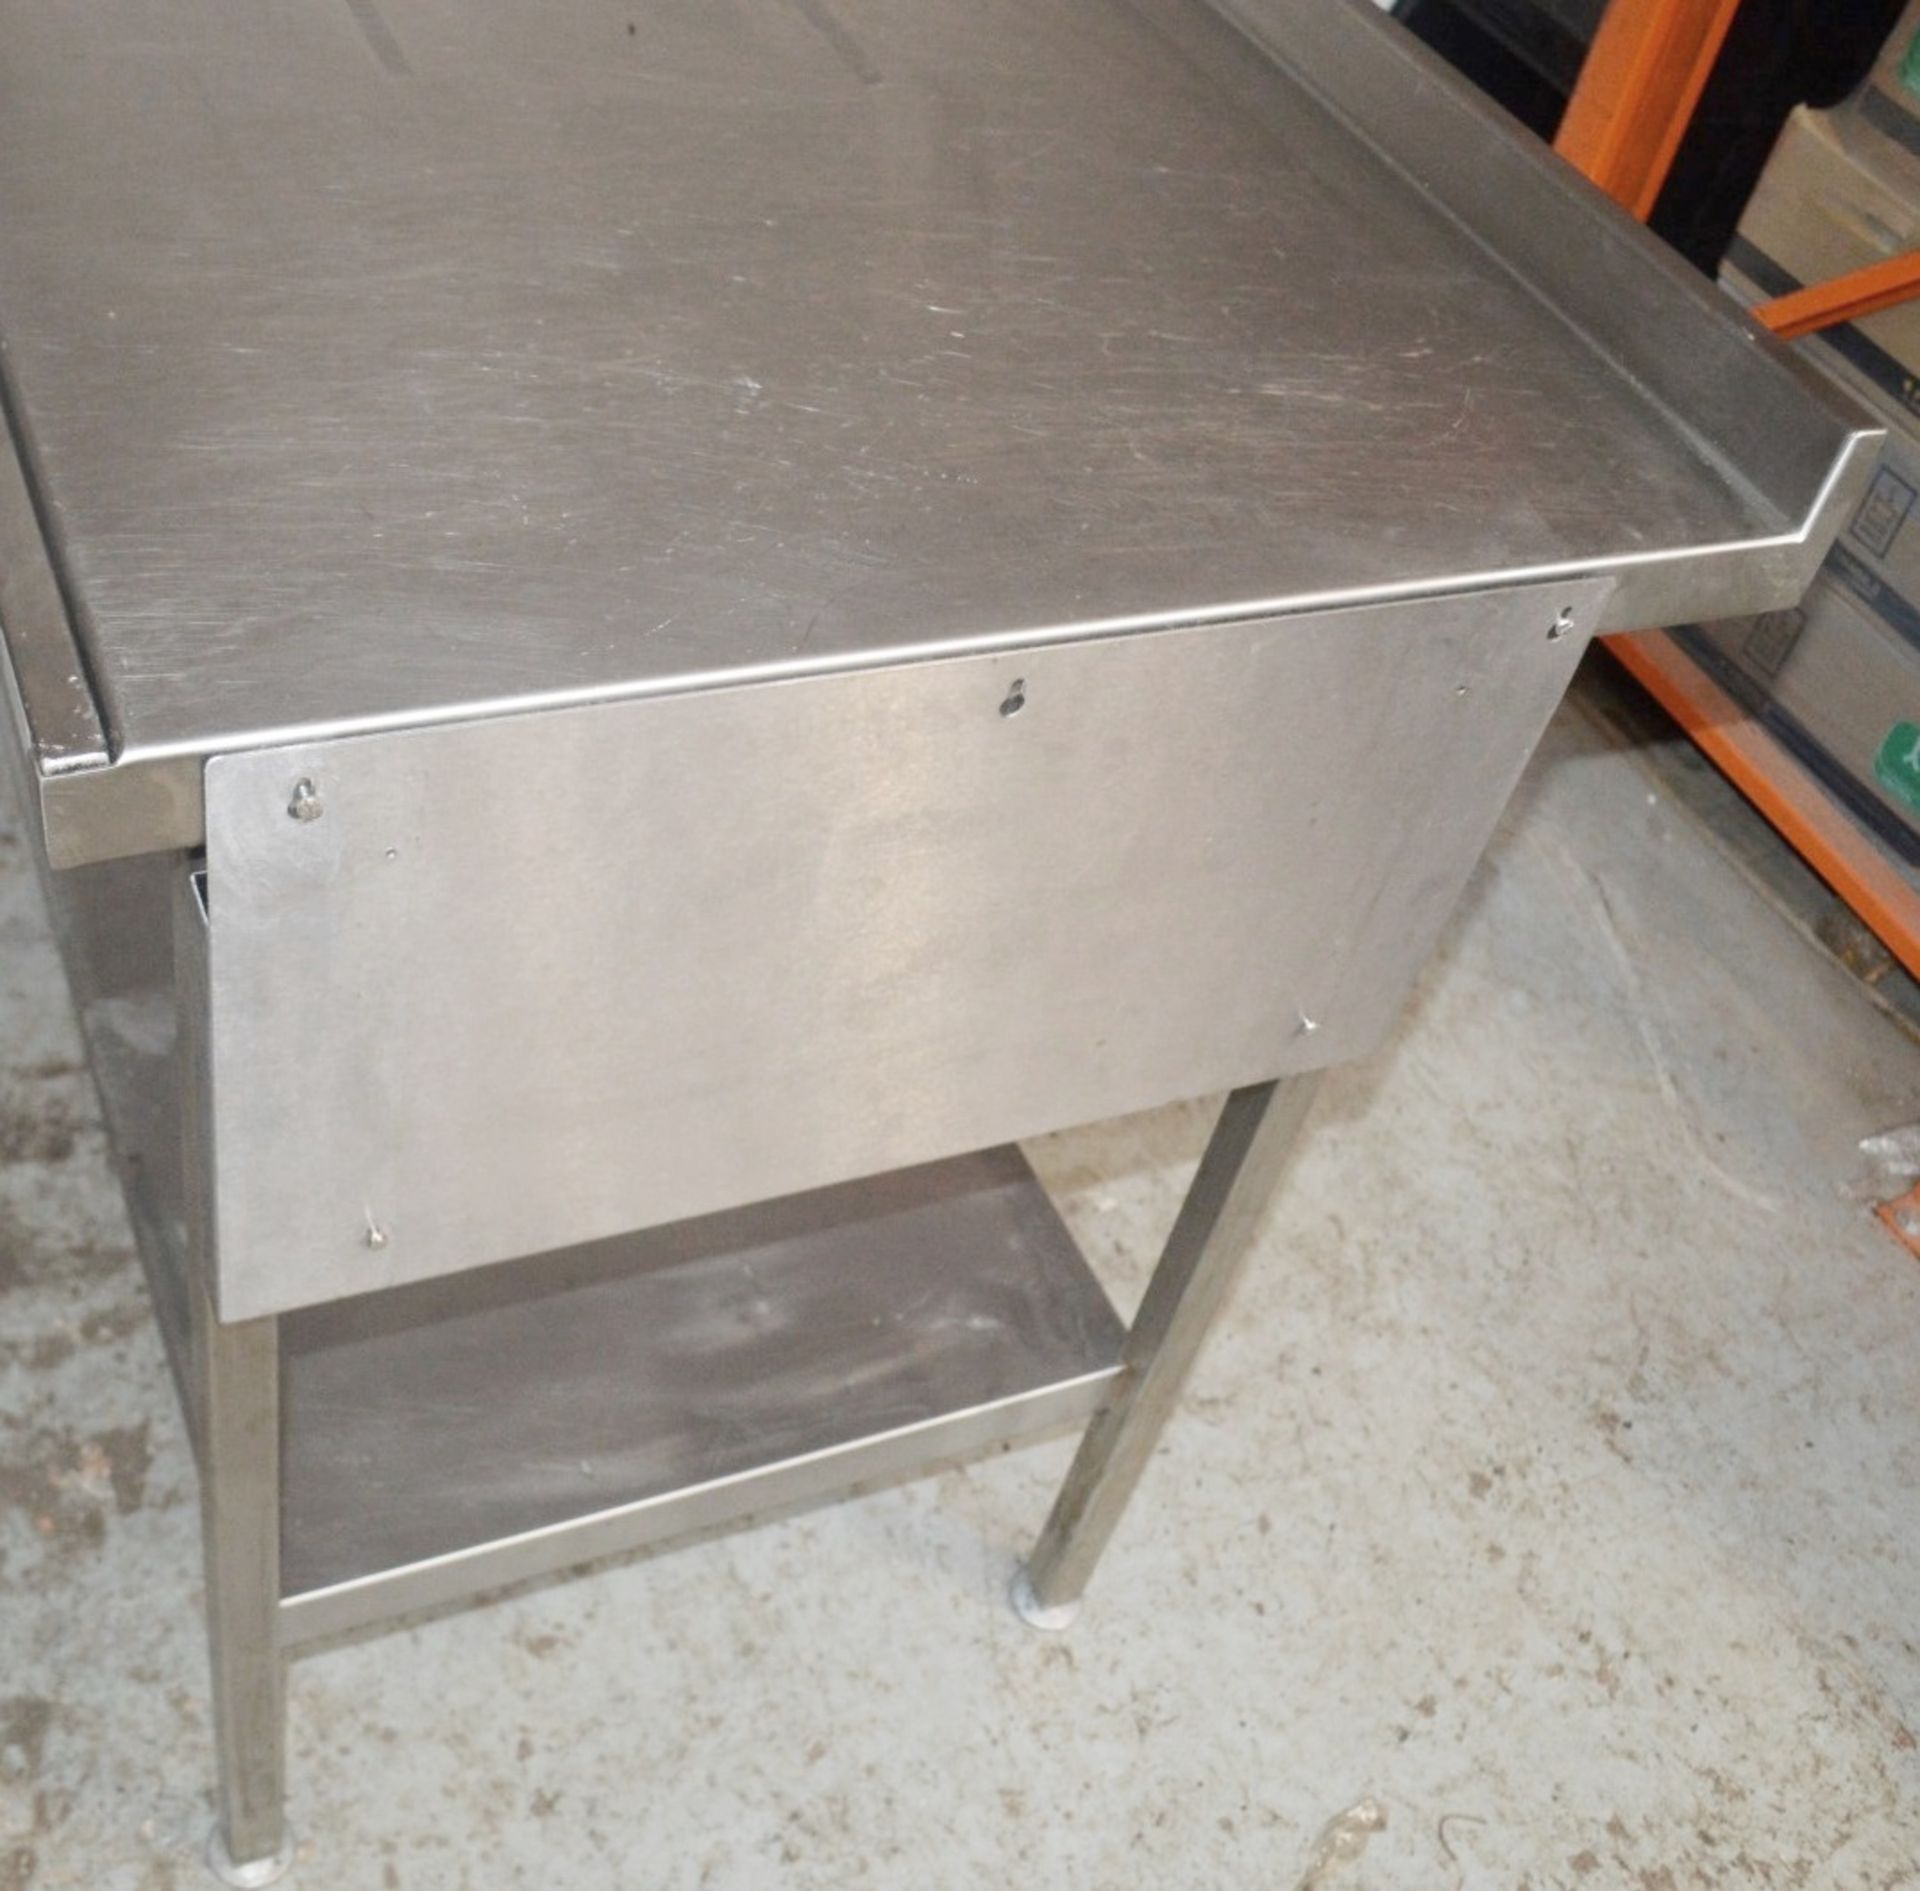 1 x Stainless Steel Commercial Kitchen Prep Counter With Drawer And Upstand - Dimensions: H86 x W150 - Image 3 of 5